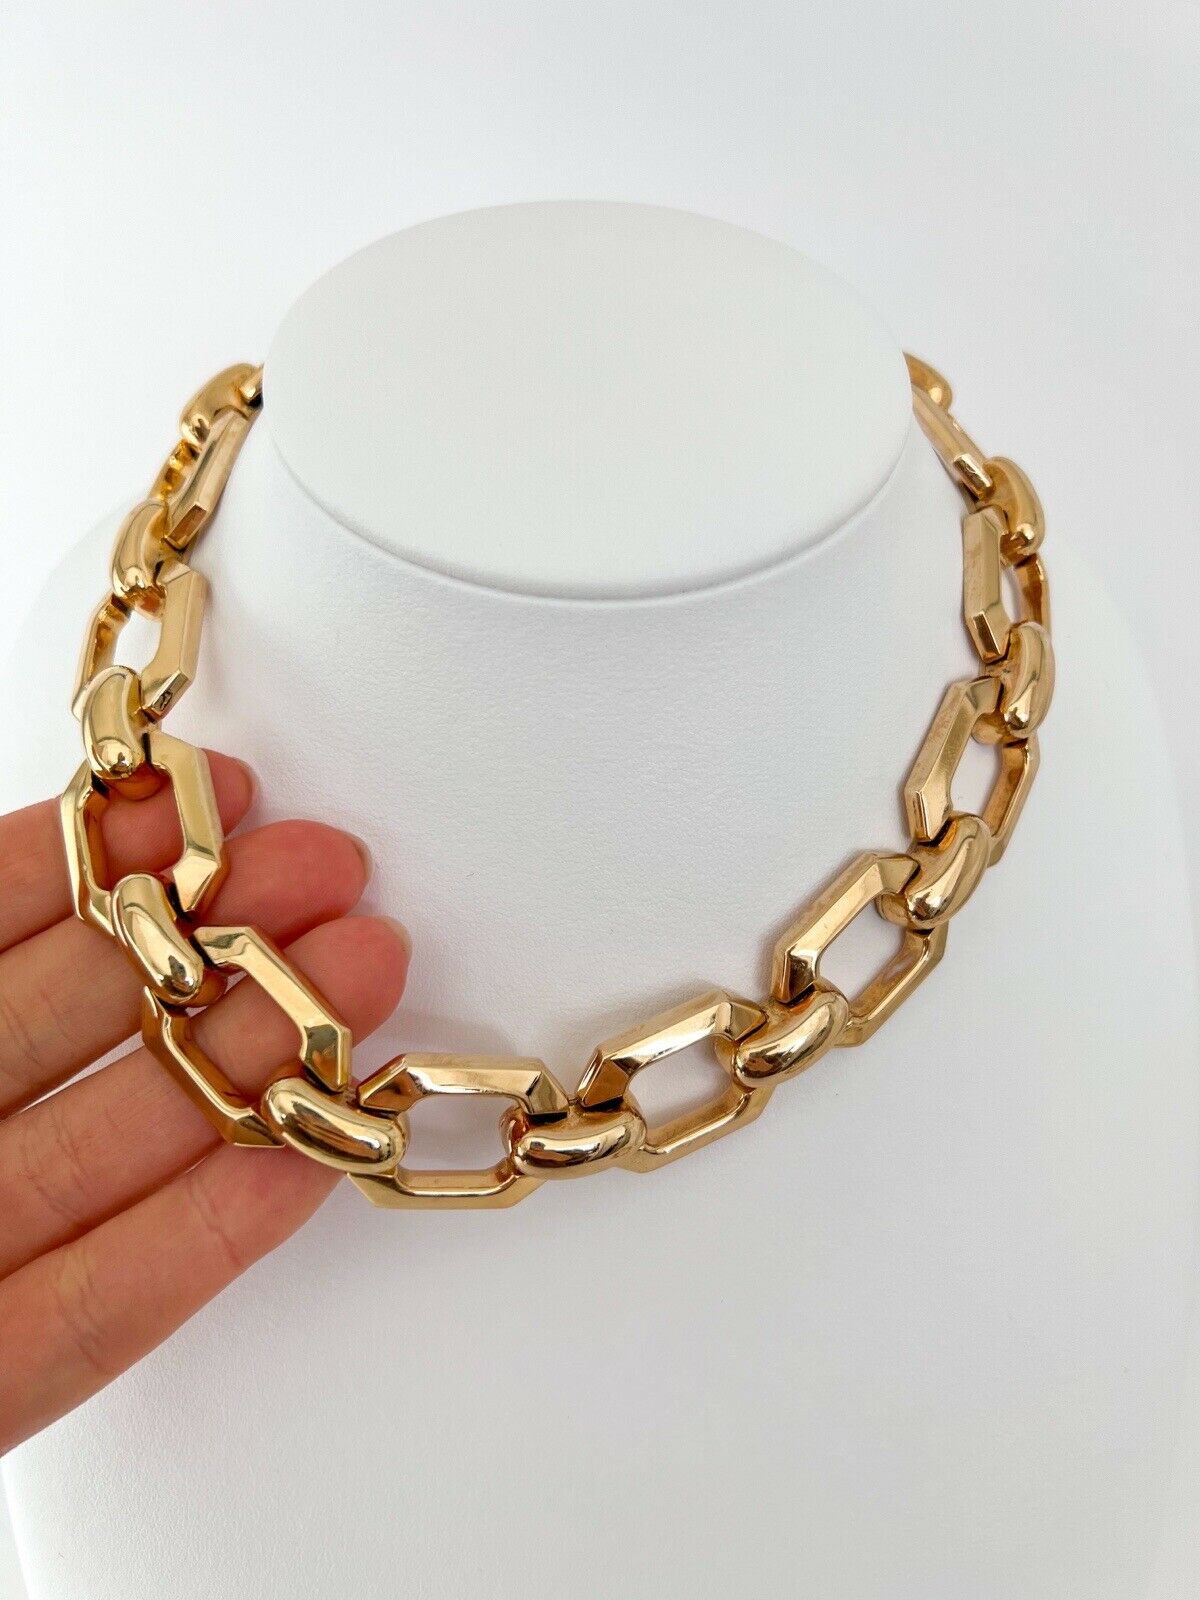 Christian Dior Vintage Chain Necklace Choker